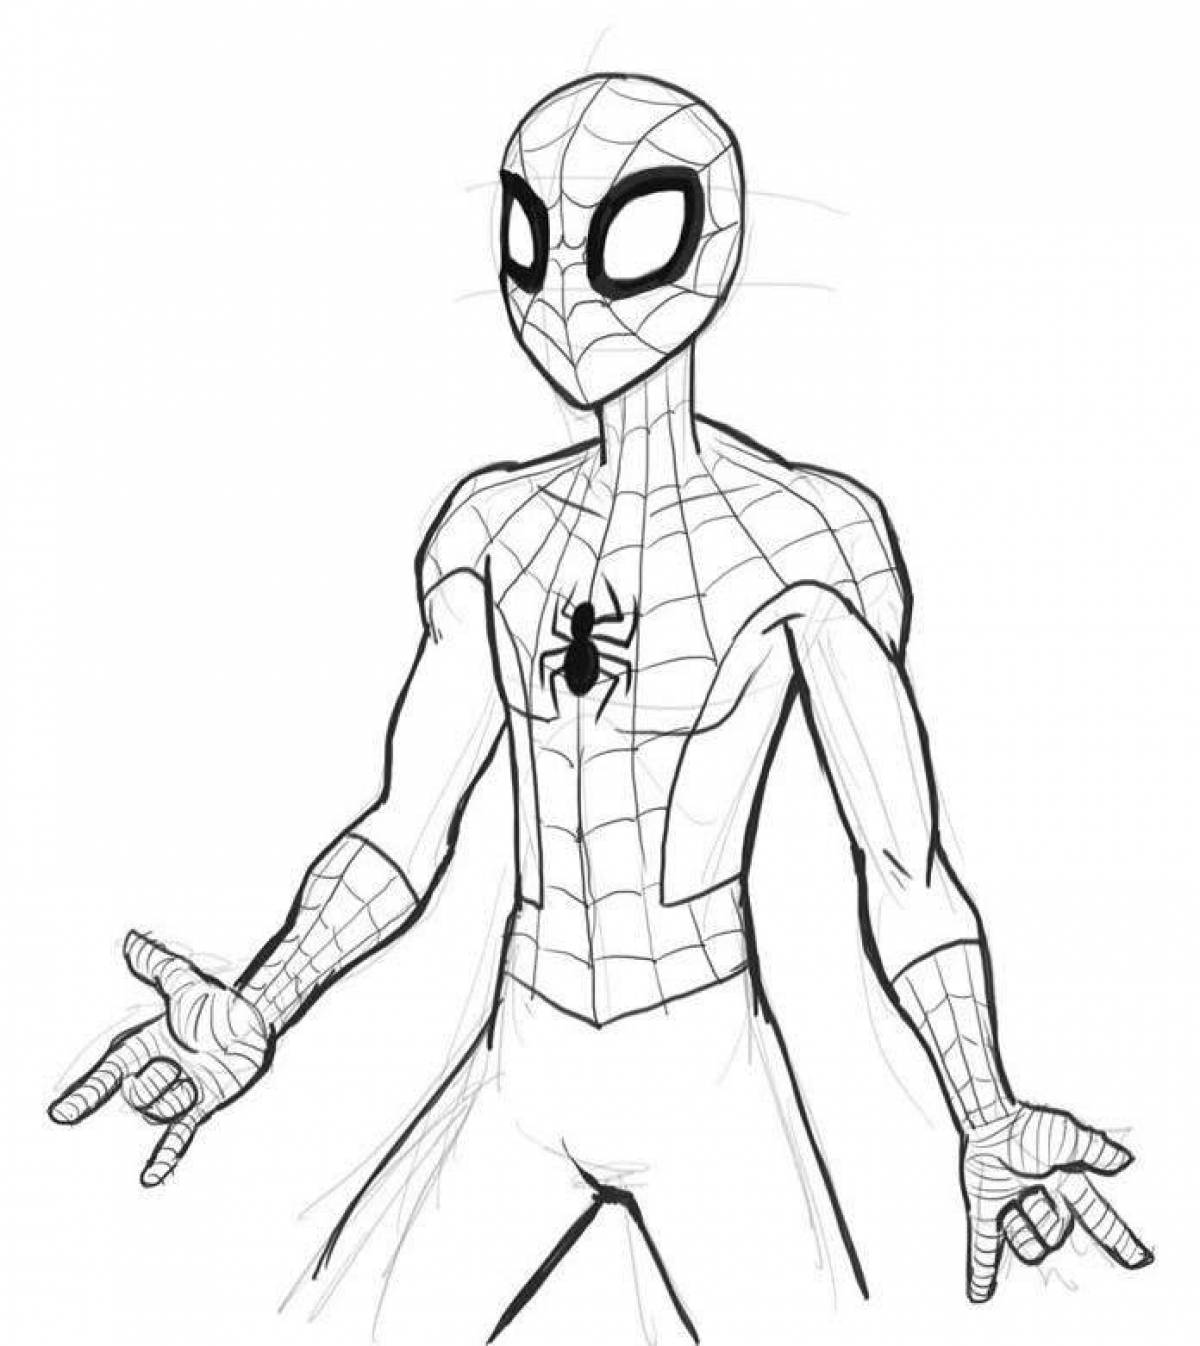 Miles morales' intriguing coloring page